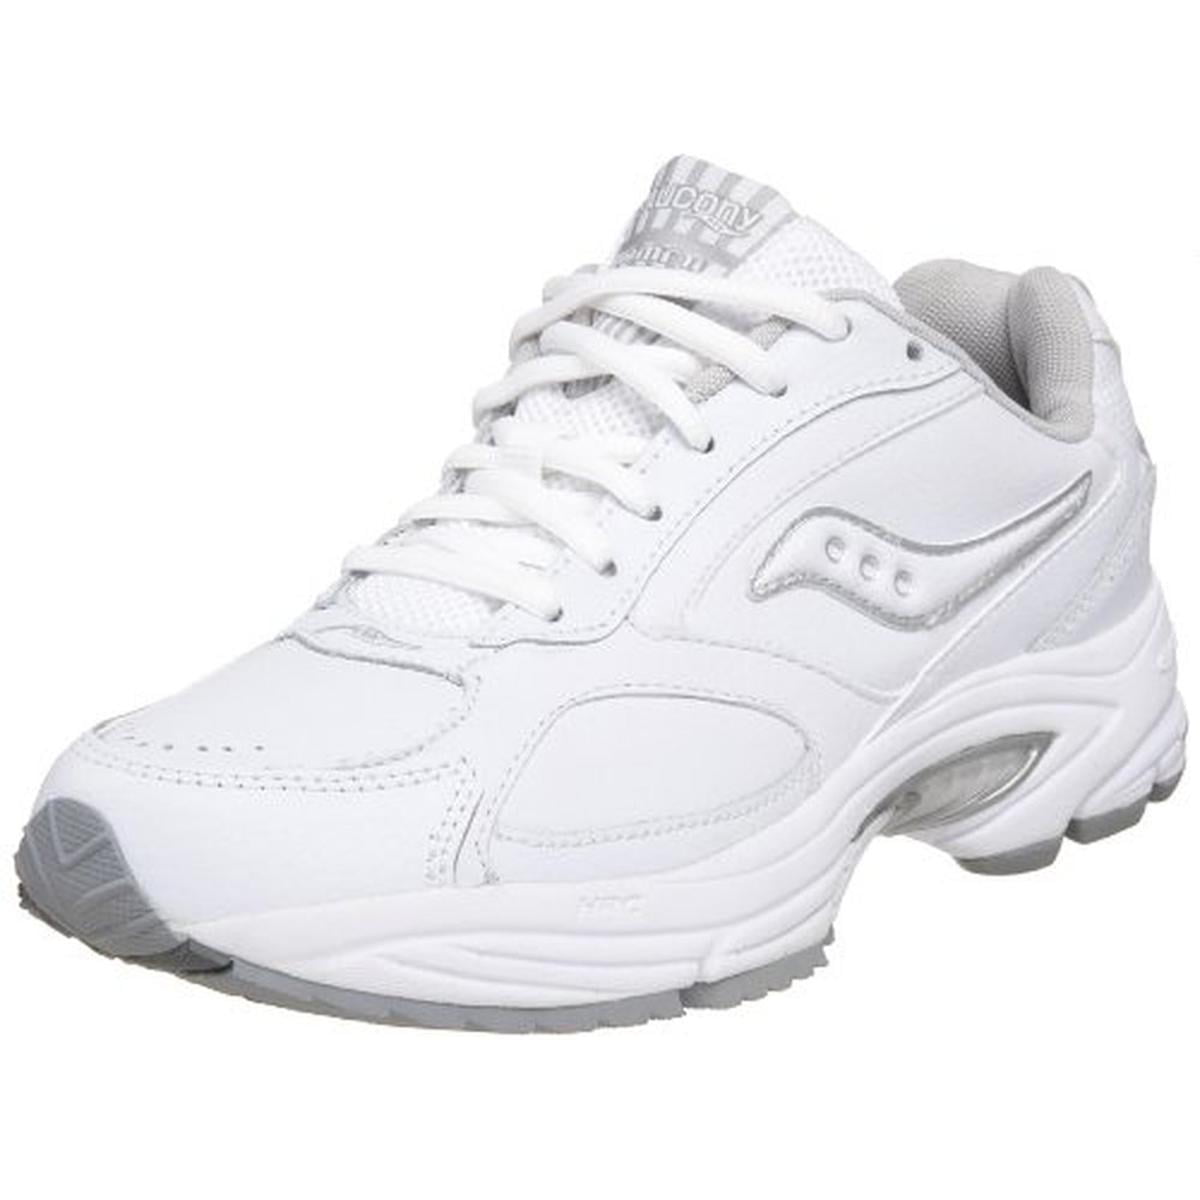 Saucony - Saucony Womens Grid Omni Walker Leather Casual Walking Shoes ...